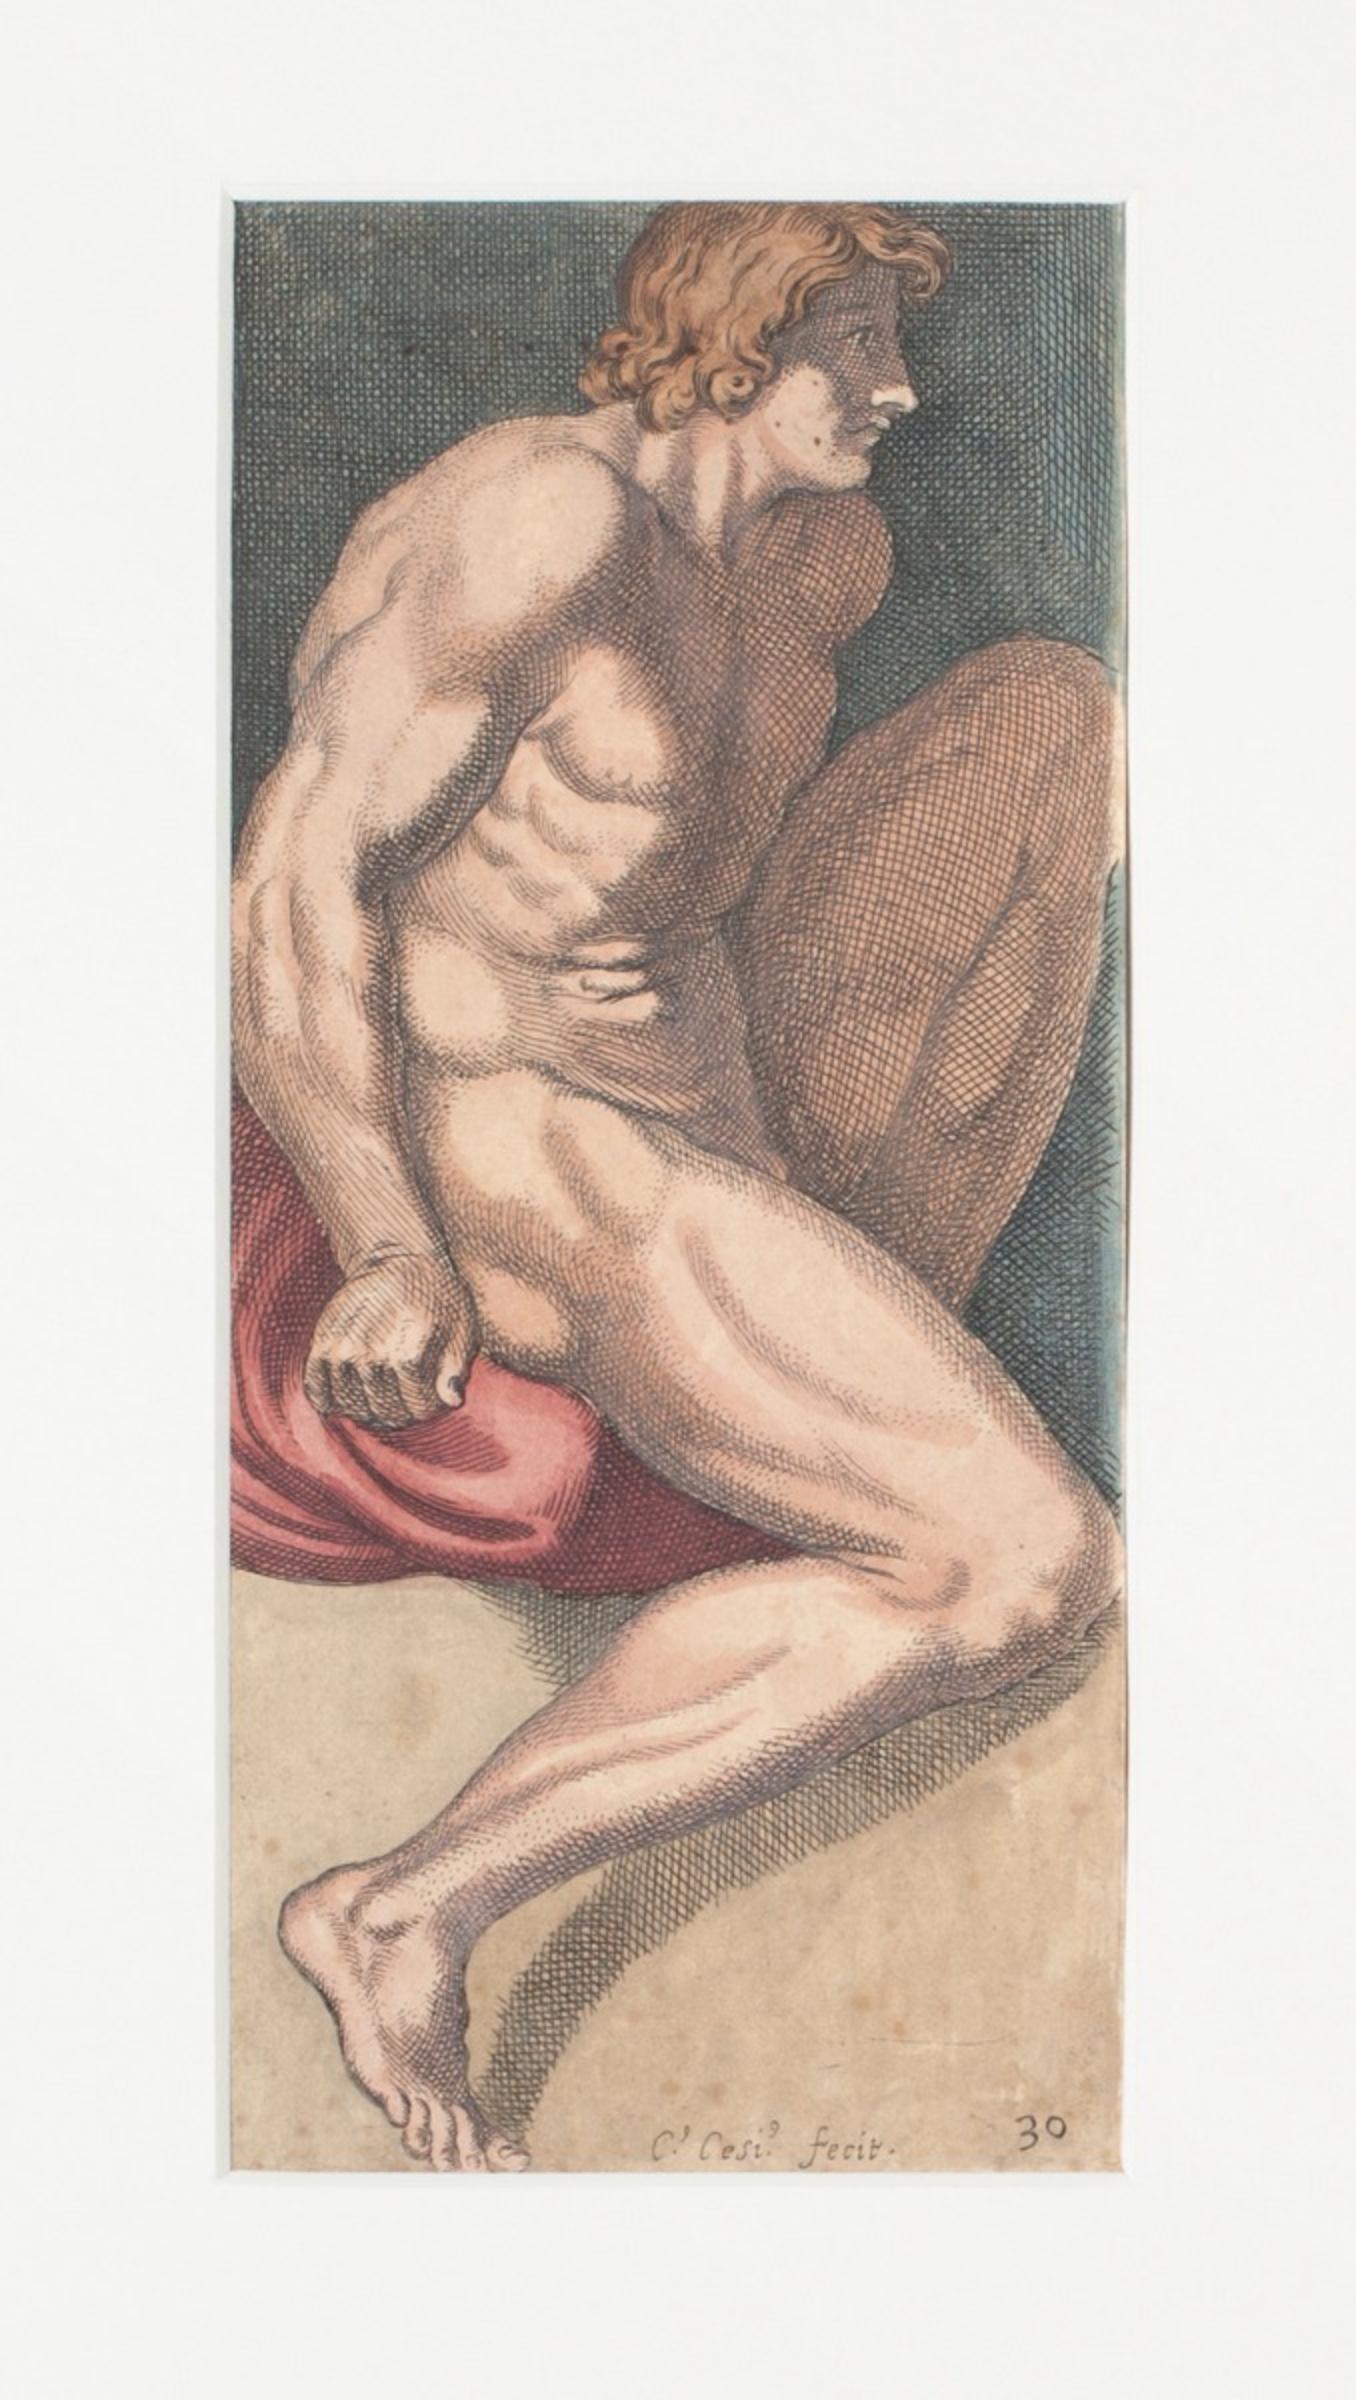 Figure is an original artwork realized by Carlo Cesio.

Original etching on paper hand-colored.

Signed at the bottom.

Good conditions, except for some foxings.

Carlo Cesi (Antrodoco, 1622 - Rieti, 1686), influenced by the work of Pietro da